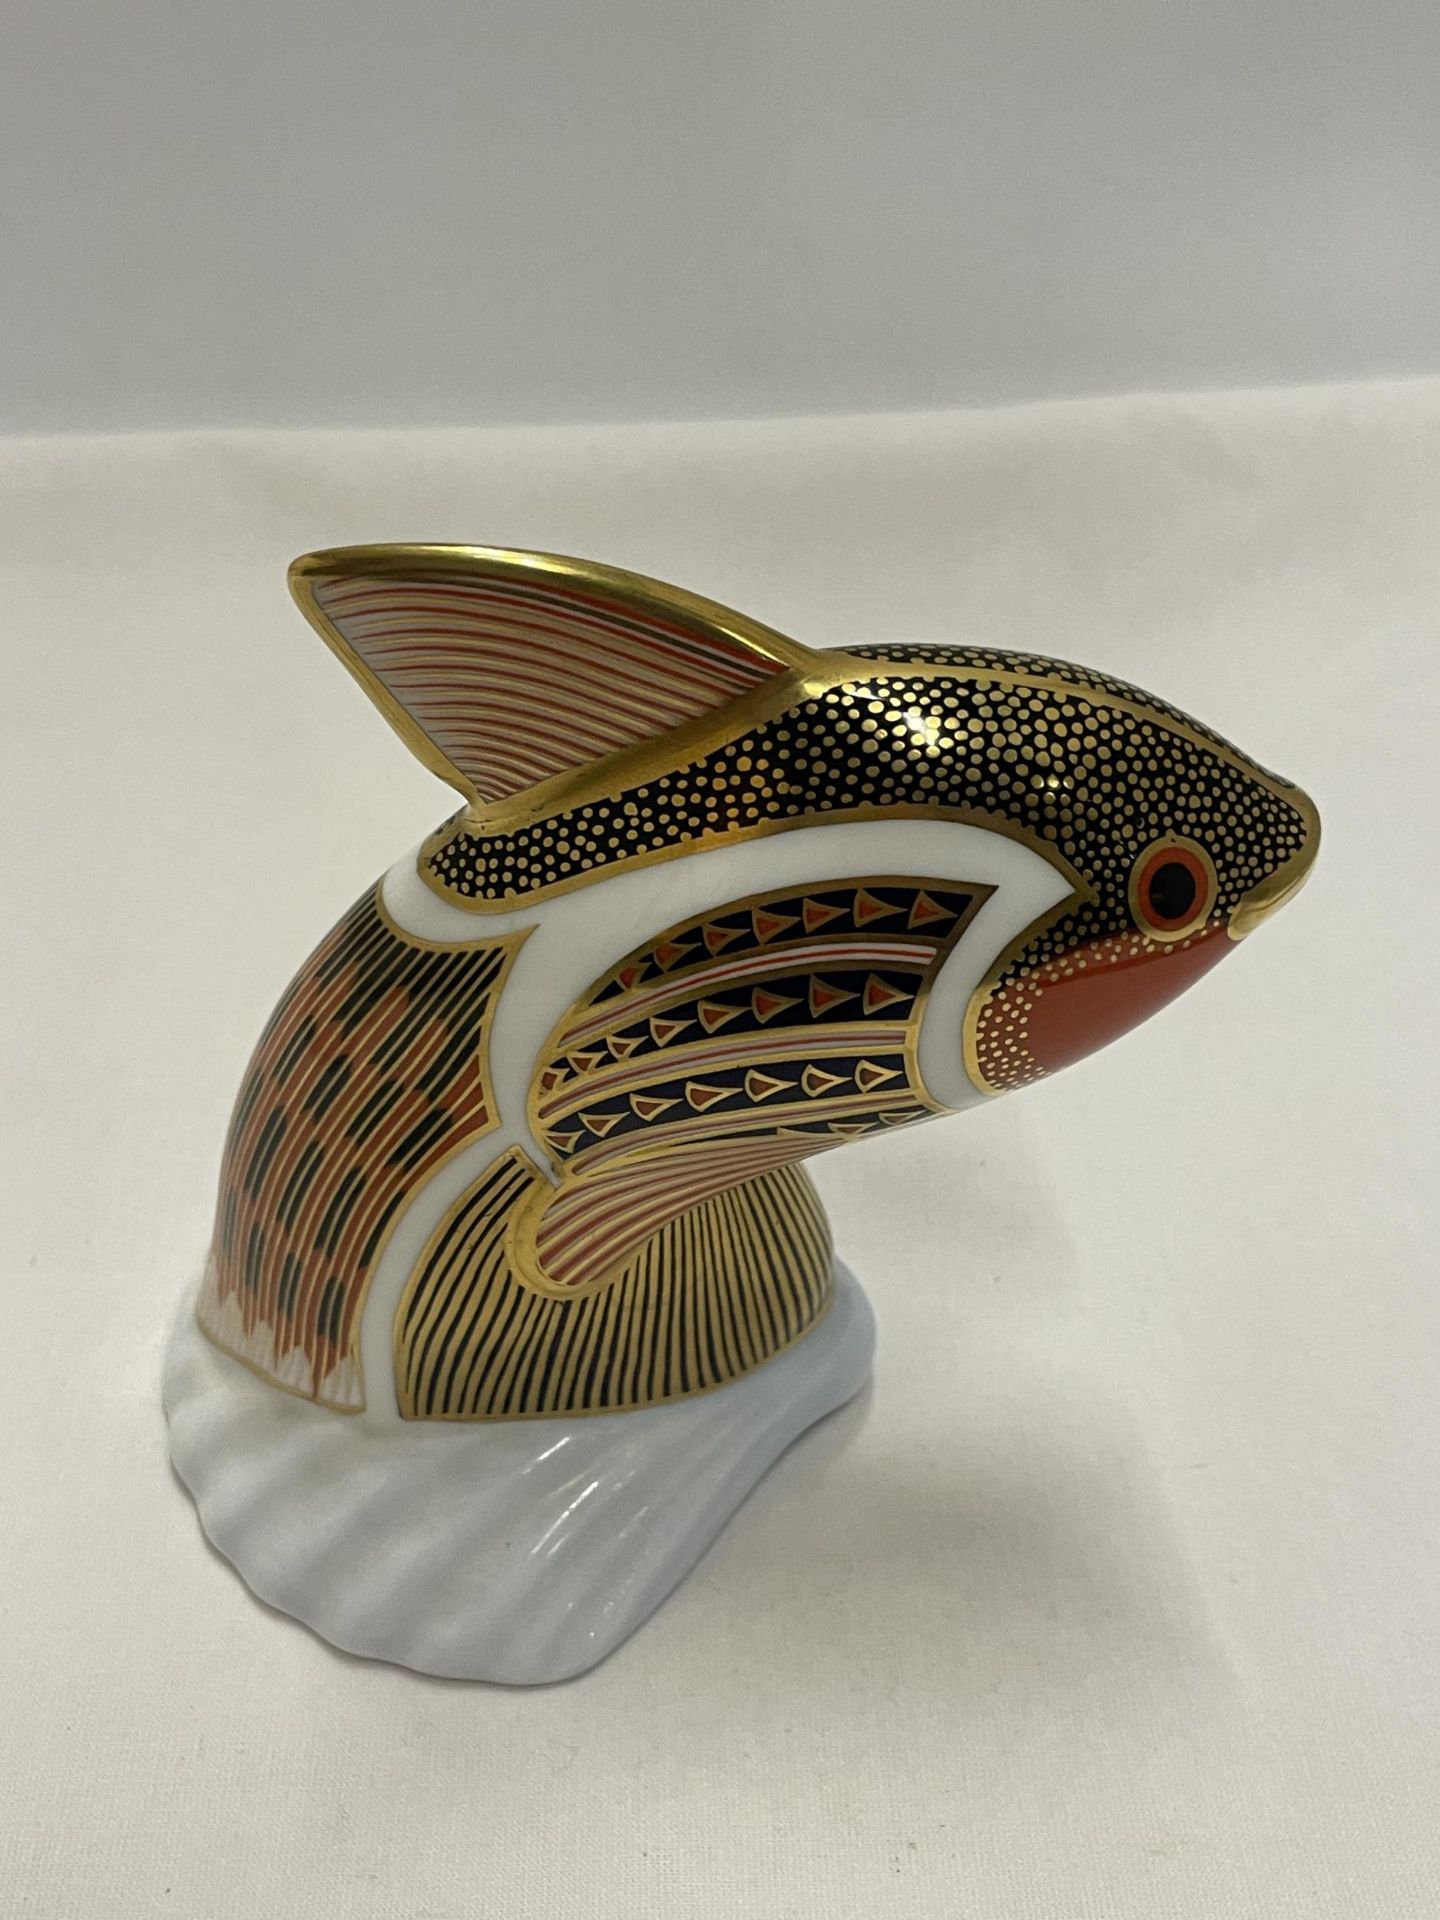 A ROYAL CROWN DERBY TROPICAL FISH GUPPY (SECOND) - Image 2 of 3